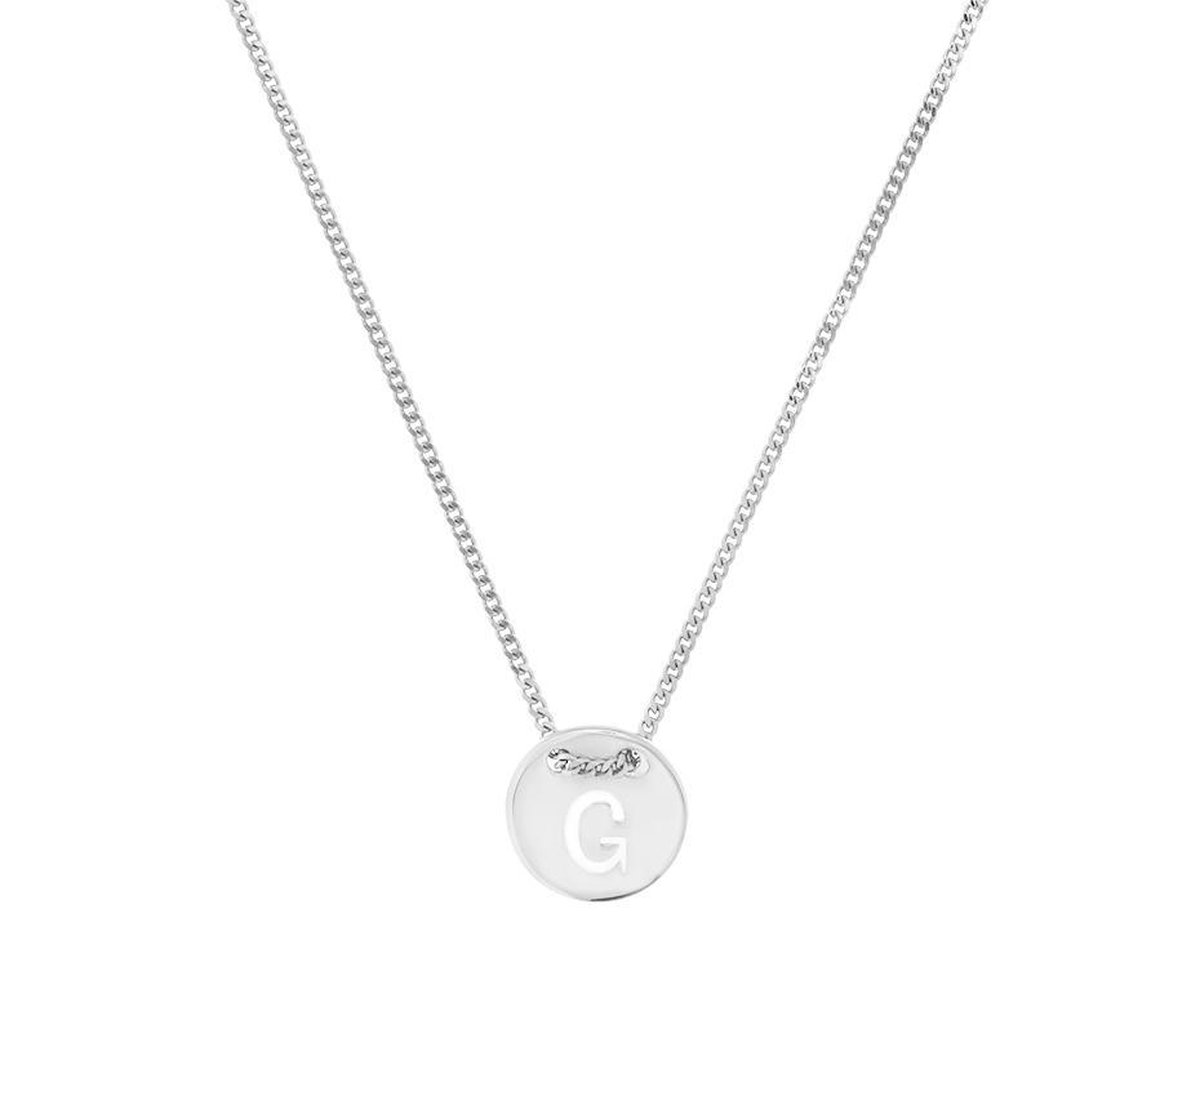 The Fashion Jewelry Collection Ketting Letter G 1,3 mm 41 + 4 cm - Zilver Gerhodineerd